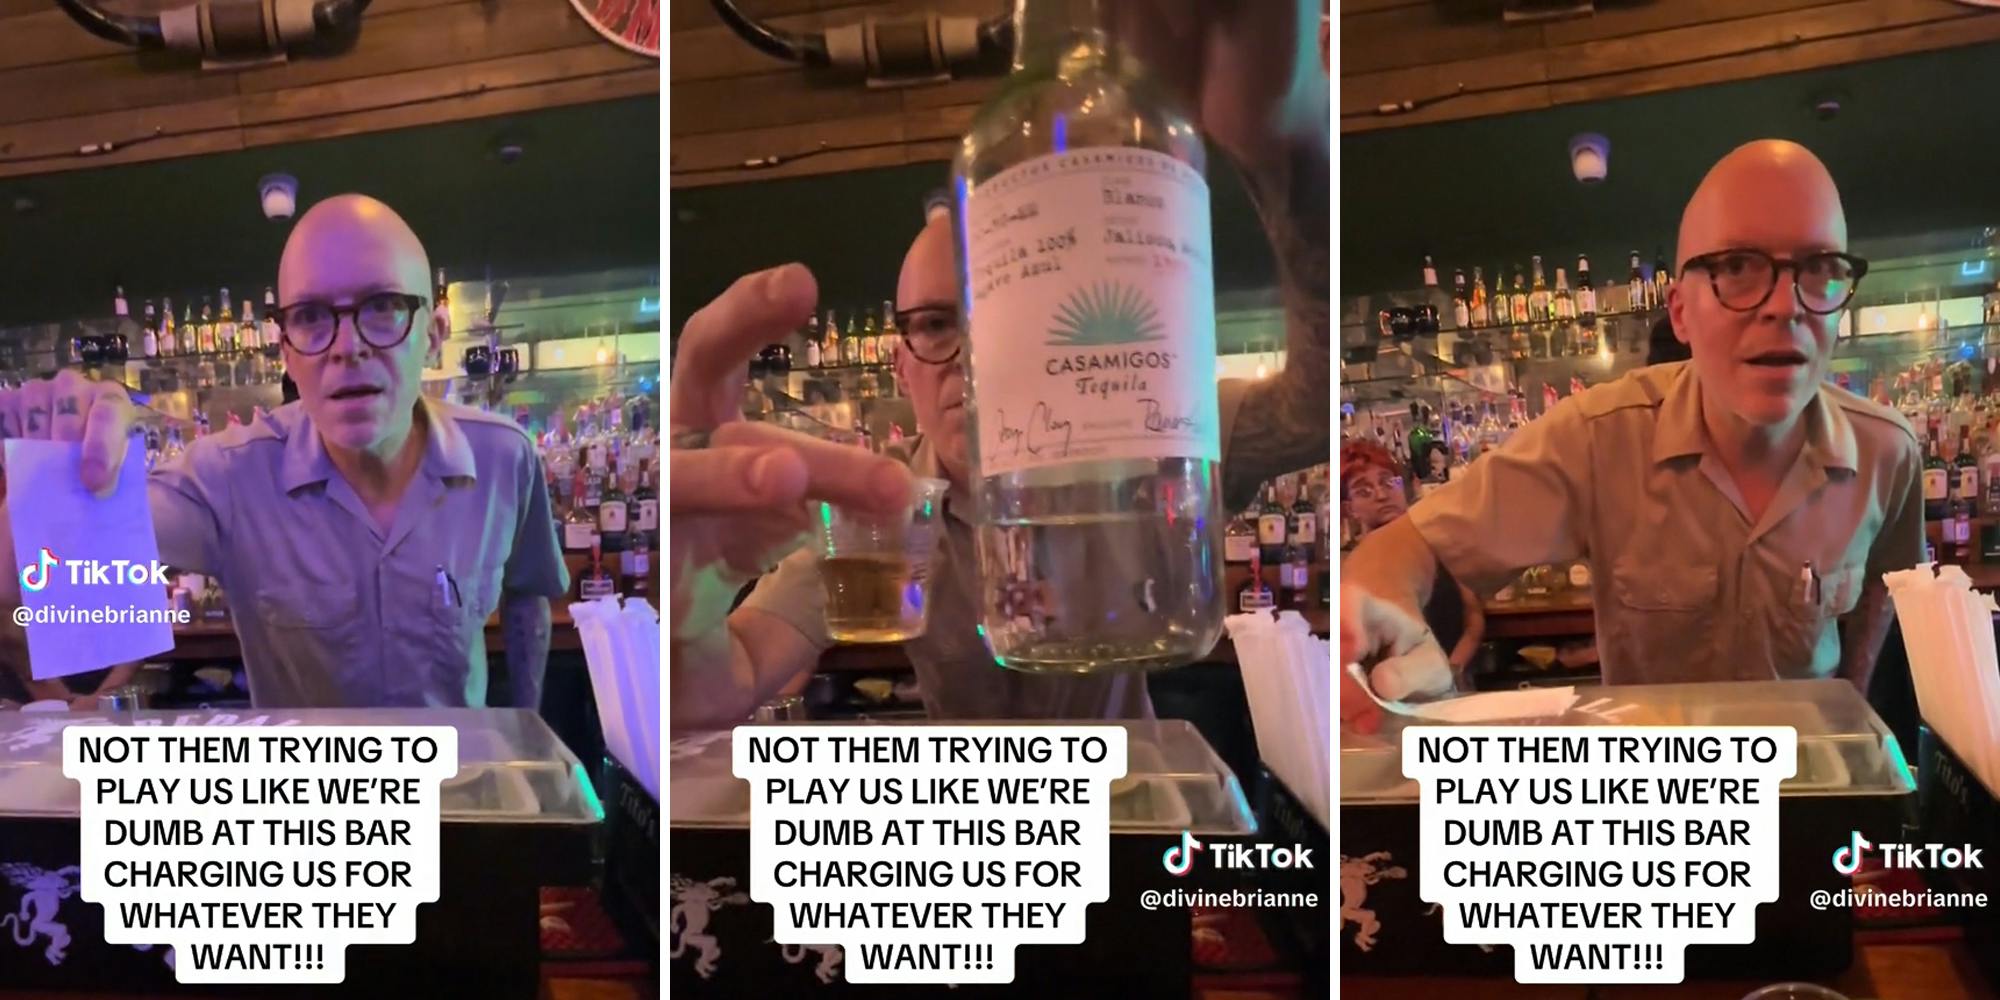 bartender holding a receipt and comparing the contents of a shot to a bottle of casamigos tequila, all with caption "not them trying to play us like we're dumb at this bar charging us for whatever they want!!"